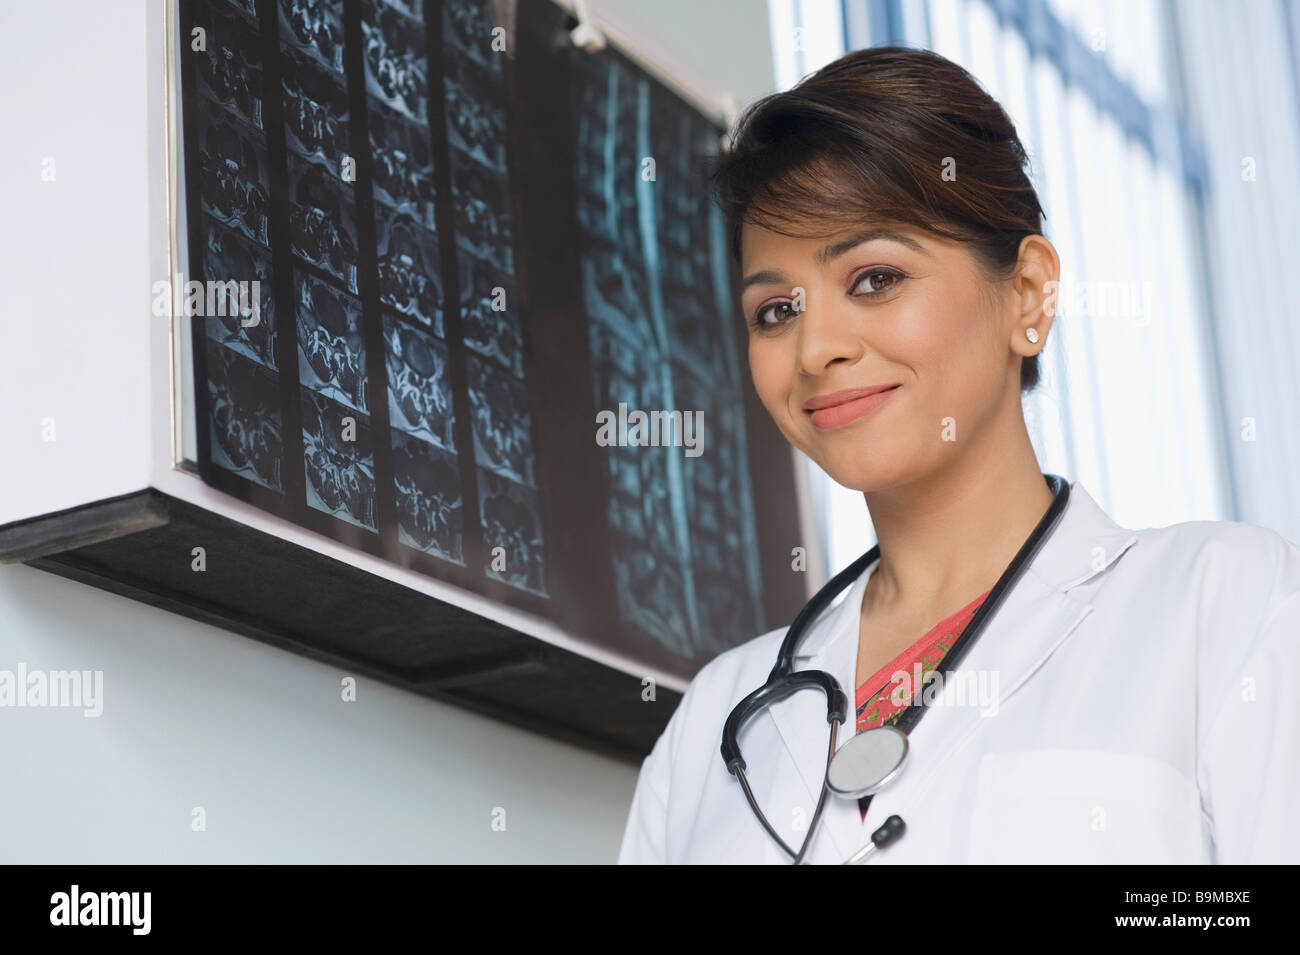 Portrait of a female doctor smiling Stock Photo